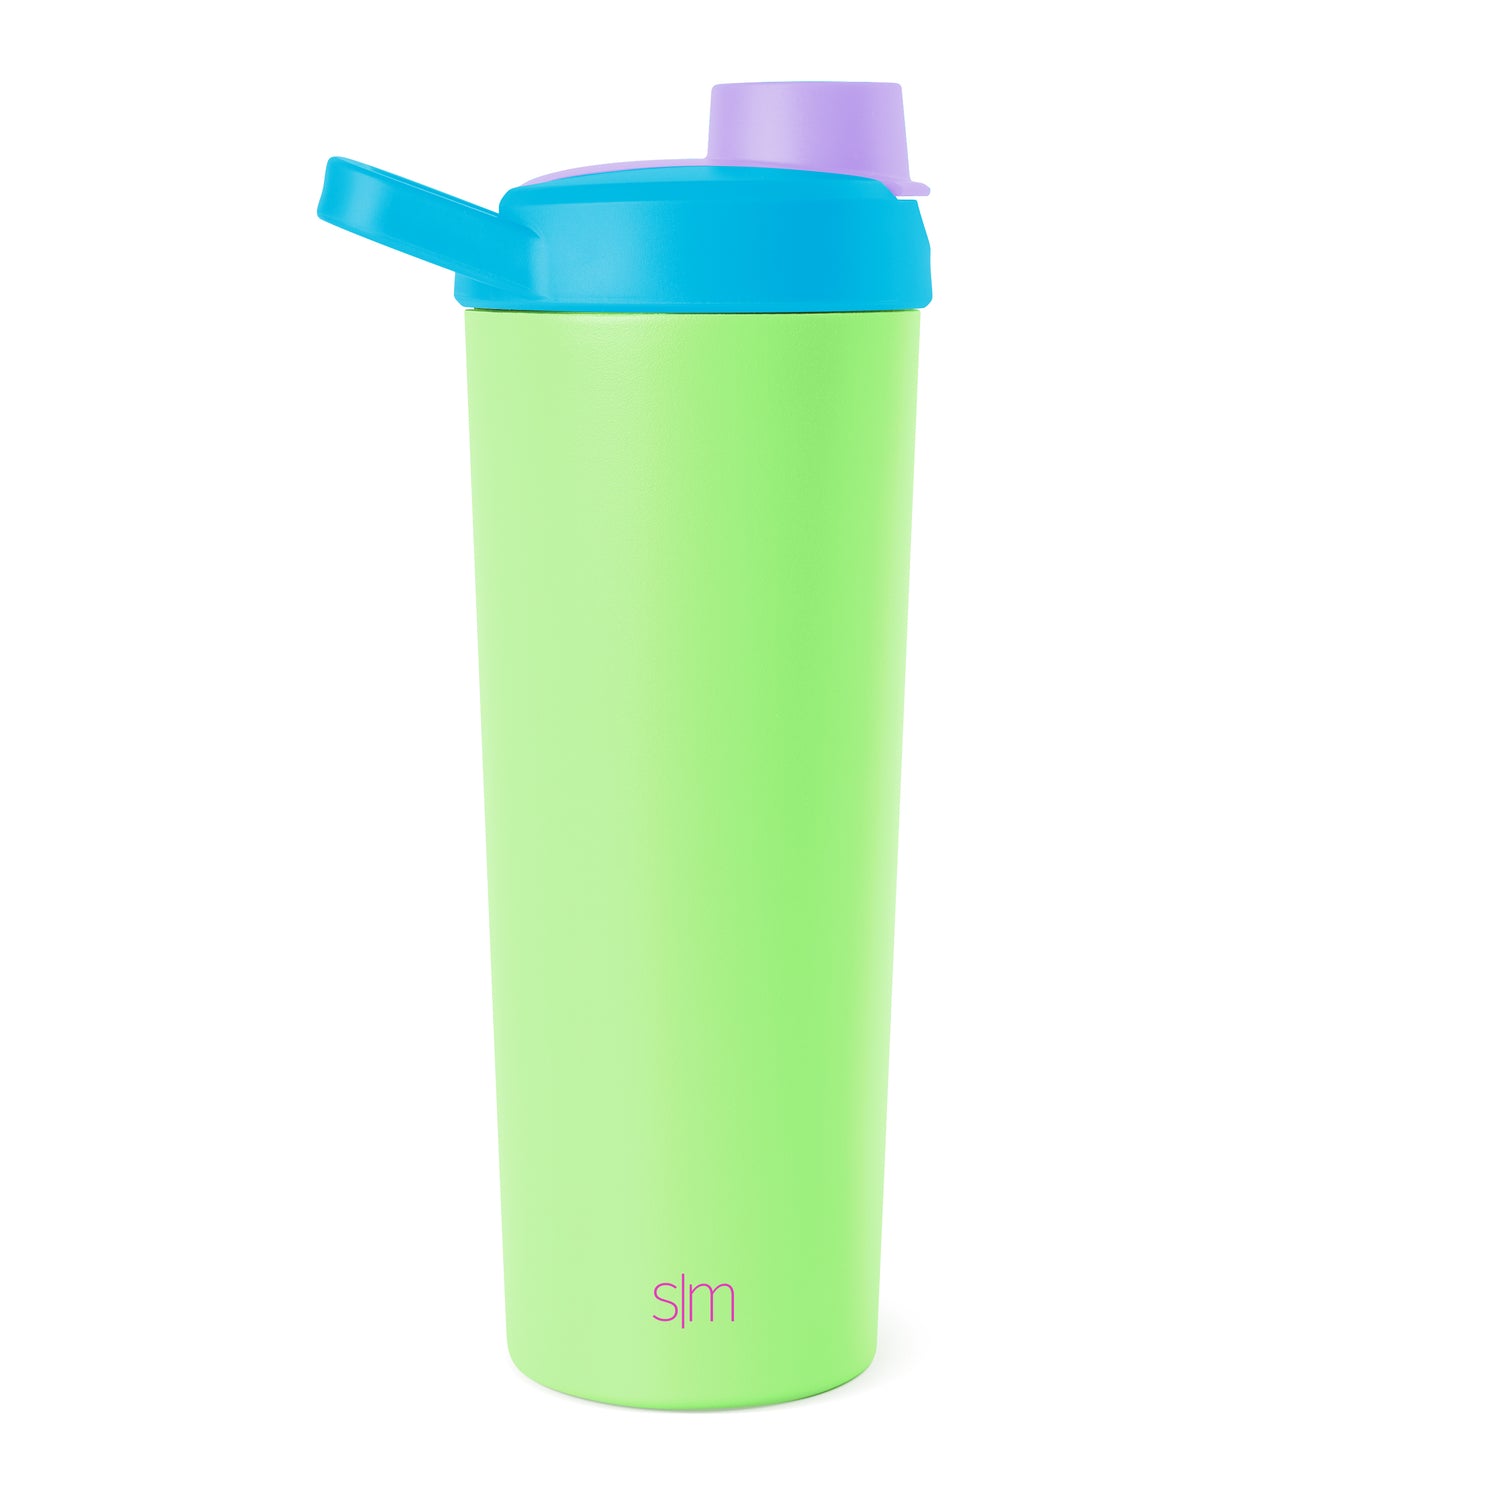 Rally Protein Shaker is live on simplemodern.com! #proteinshaker